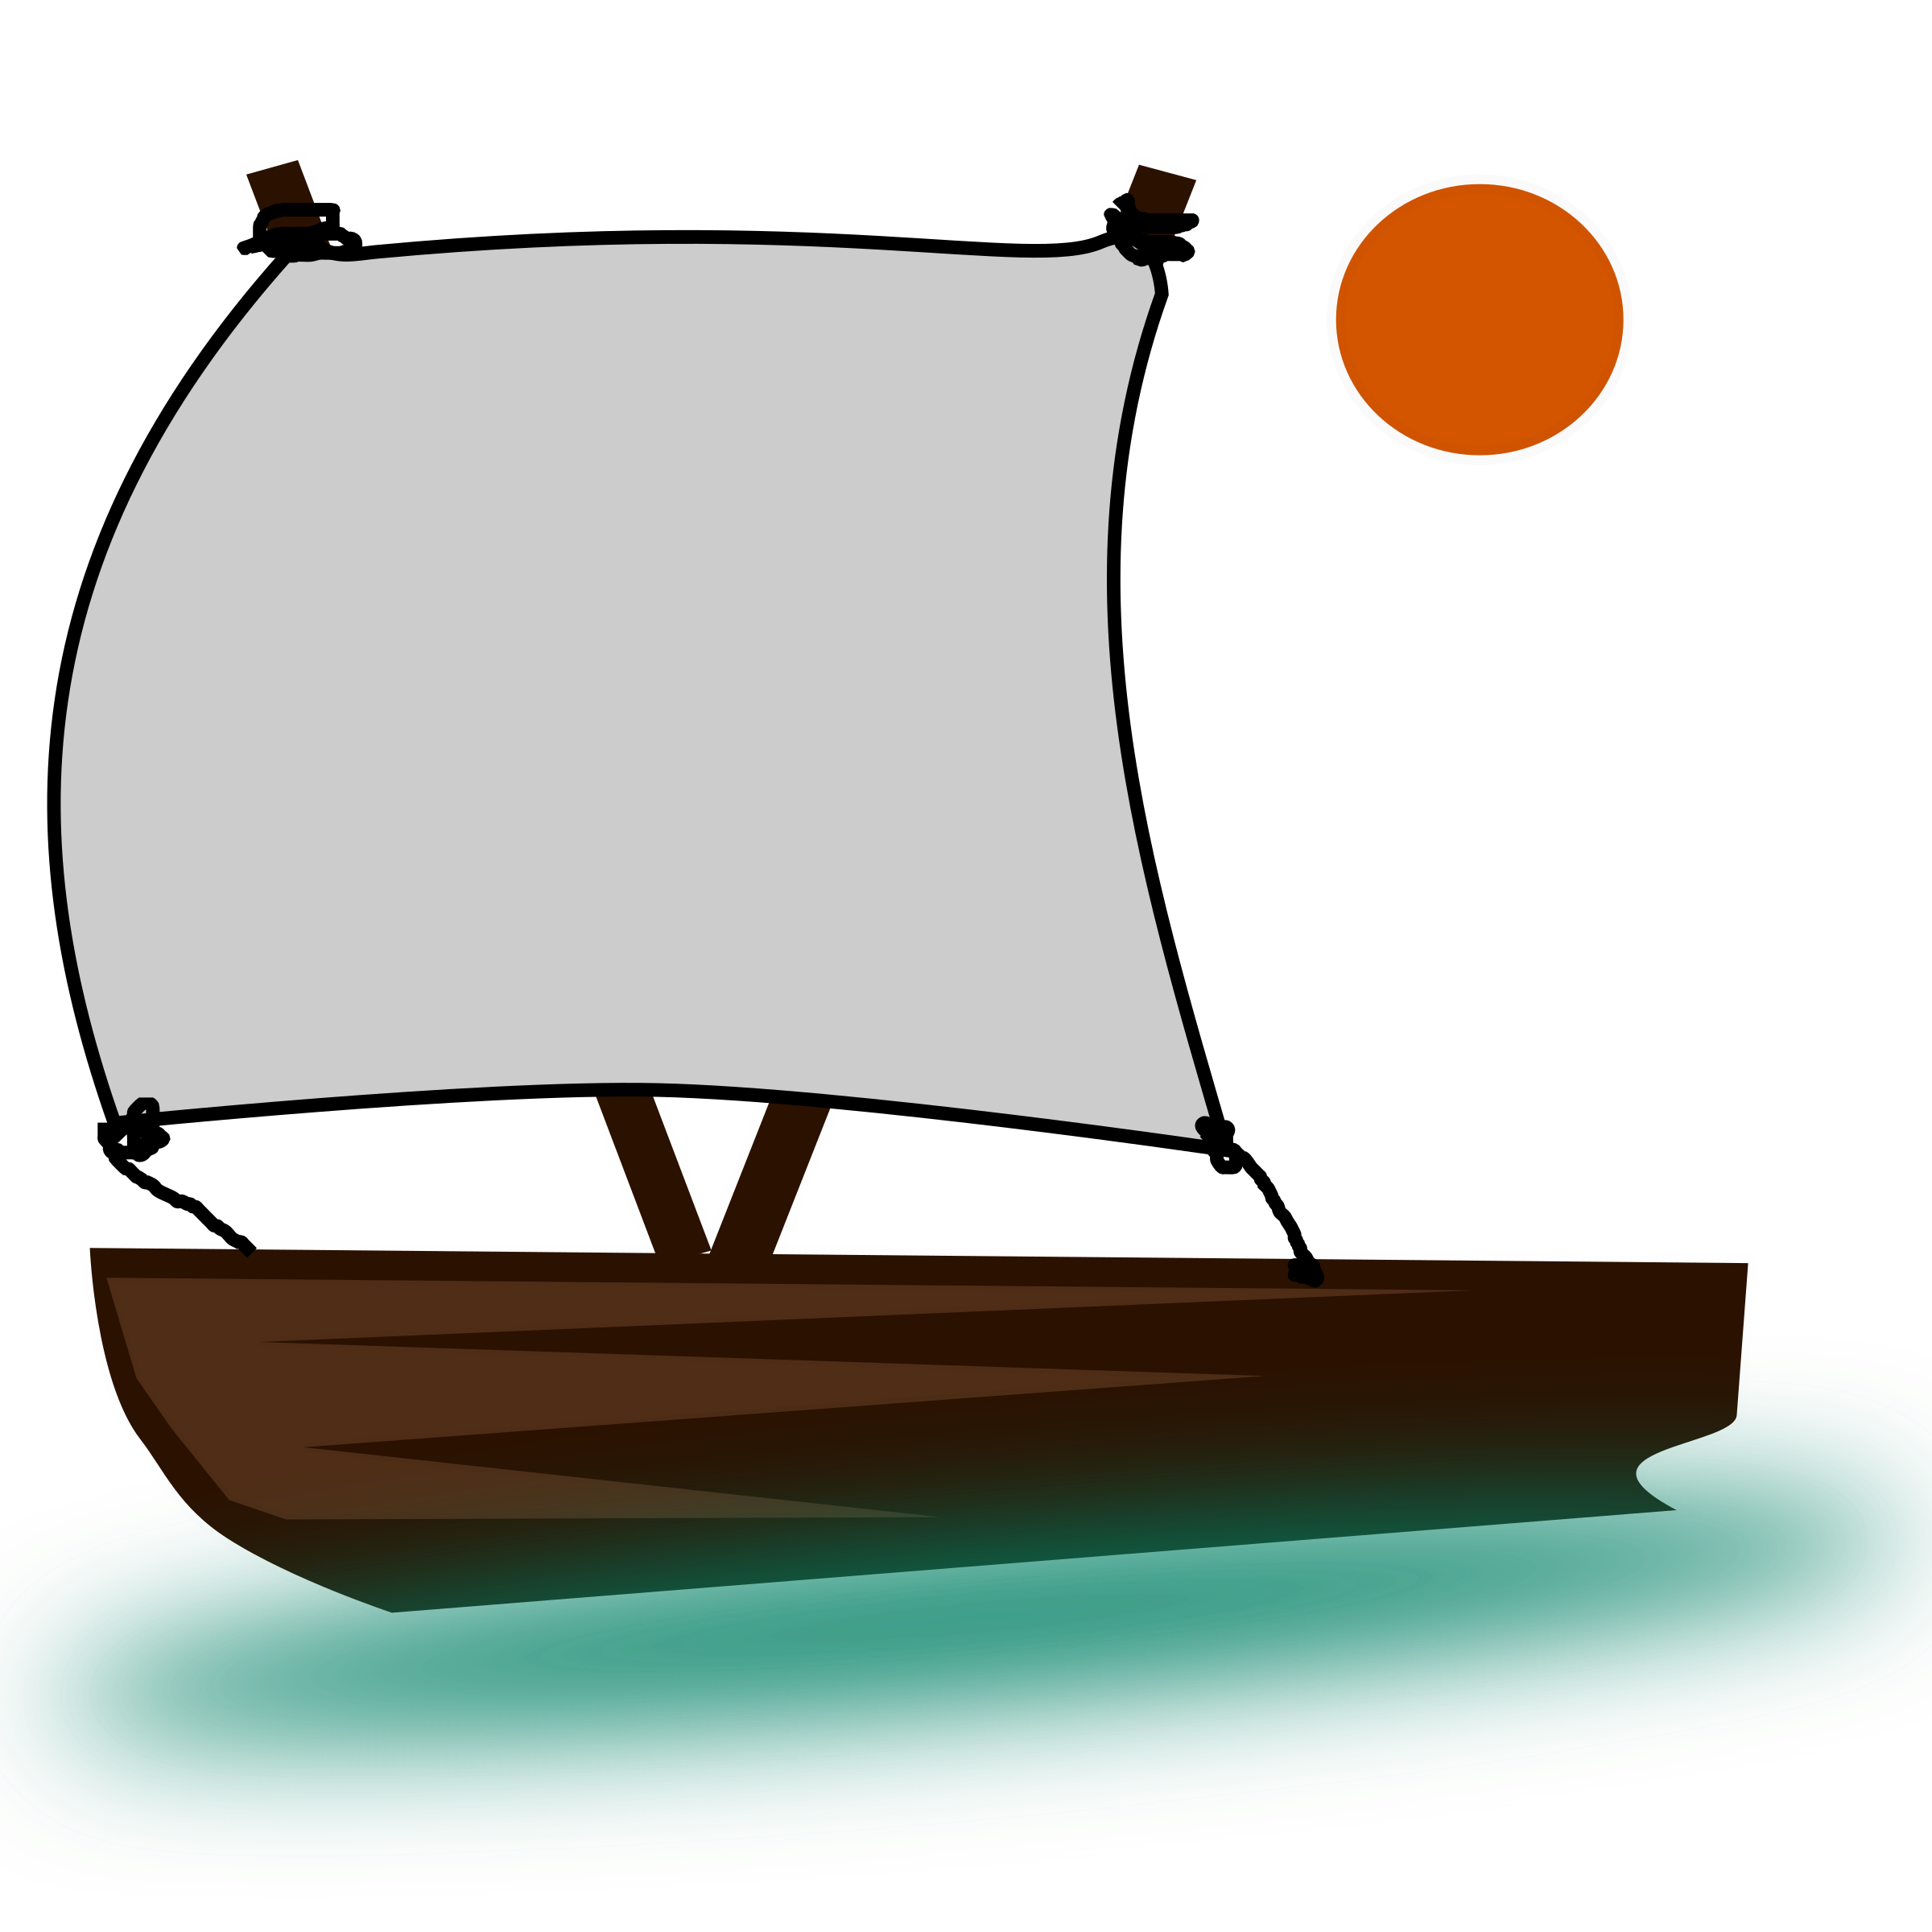 boat racing clipart - photo #37